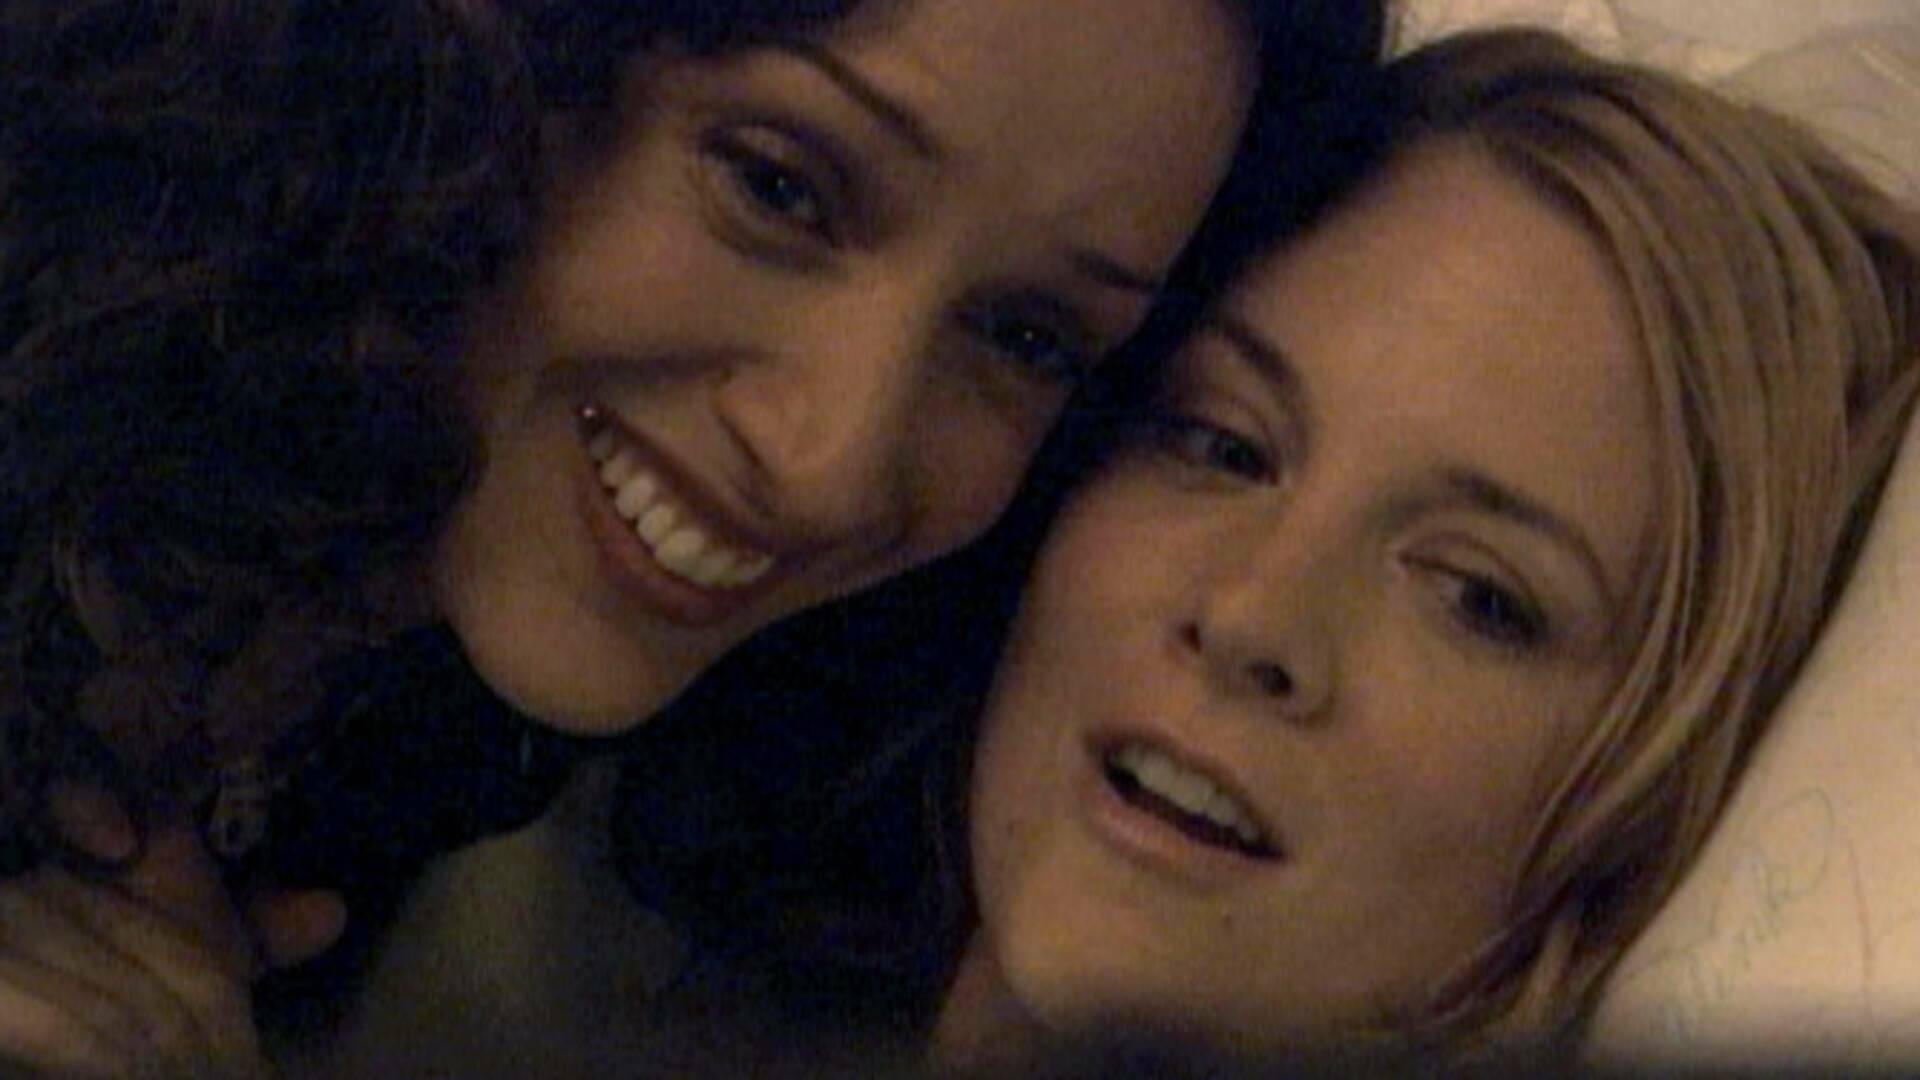 Watch The L Word: The L Word Season 1 Trailer - Full show on